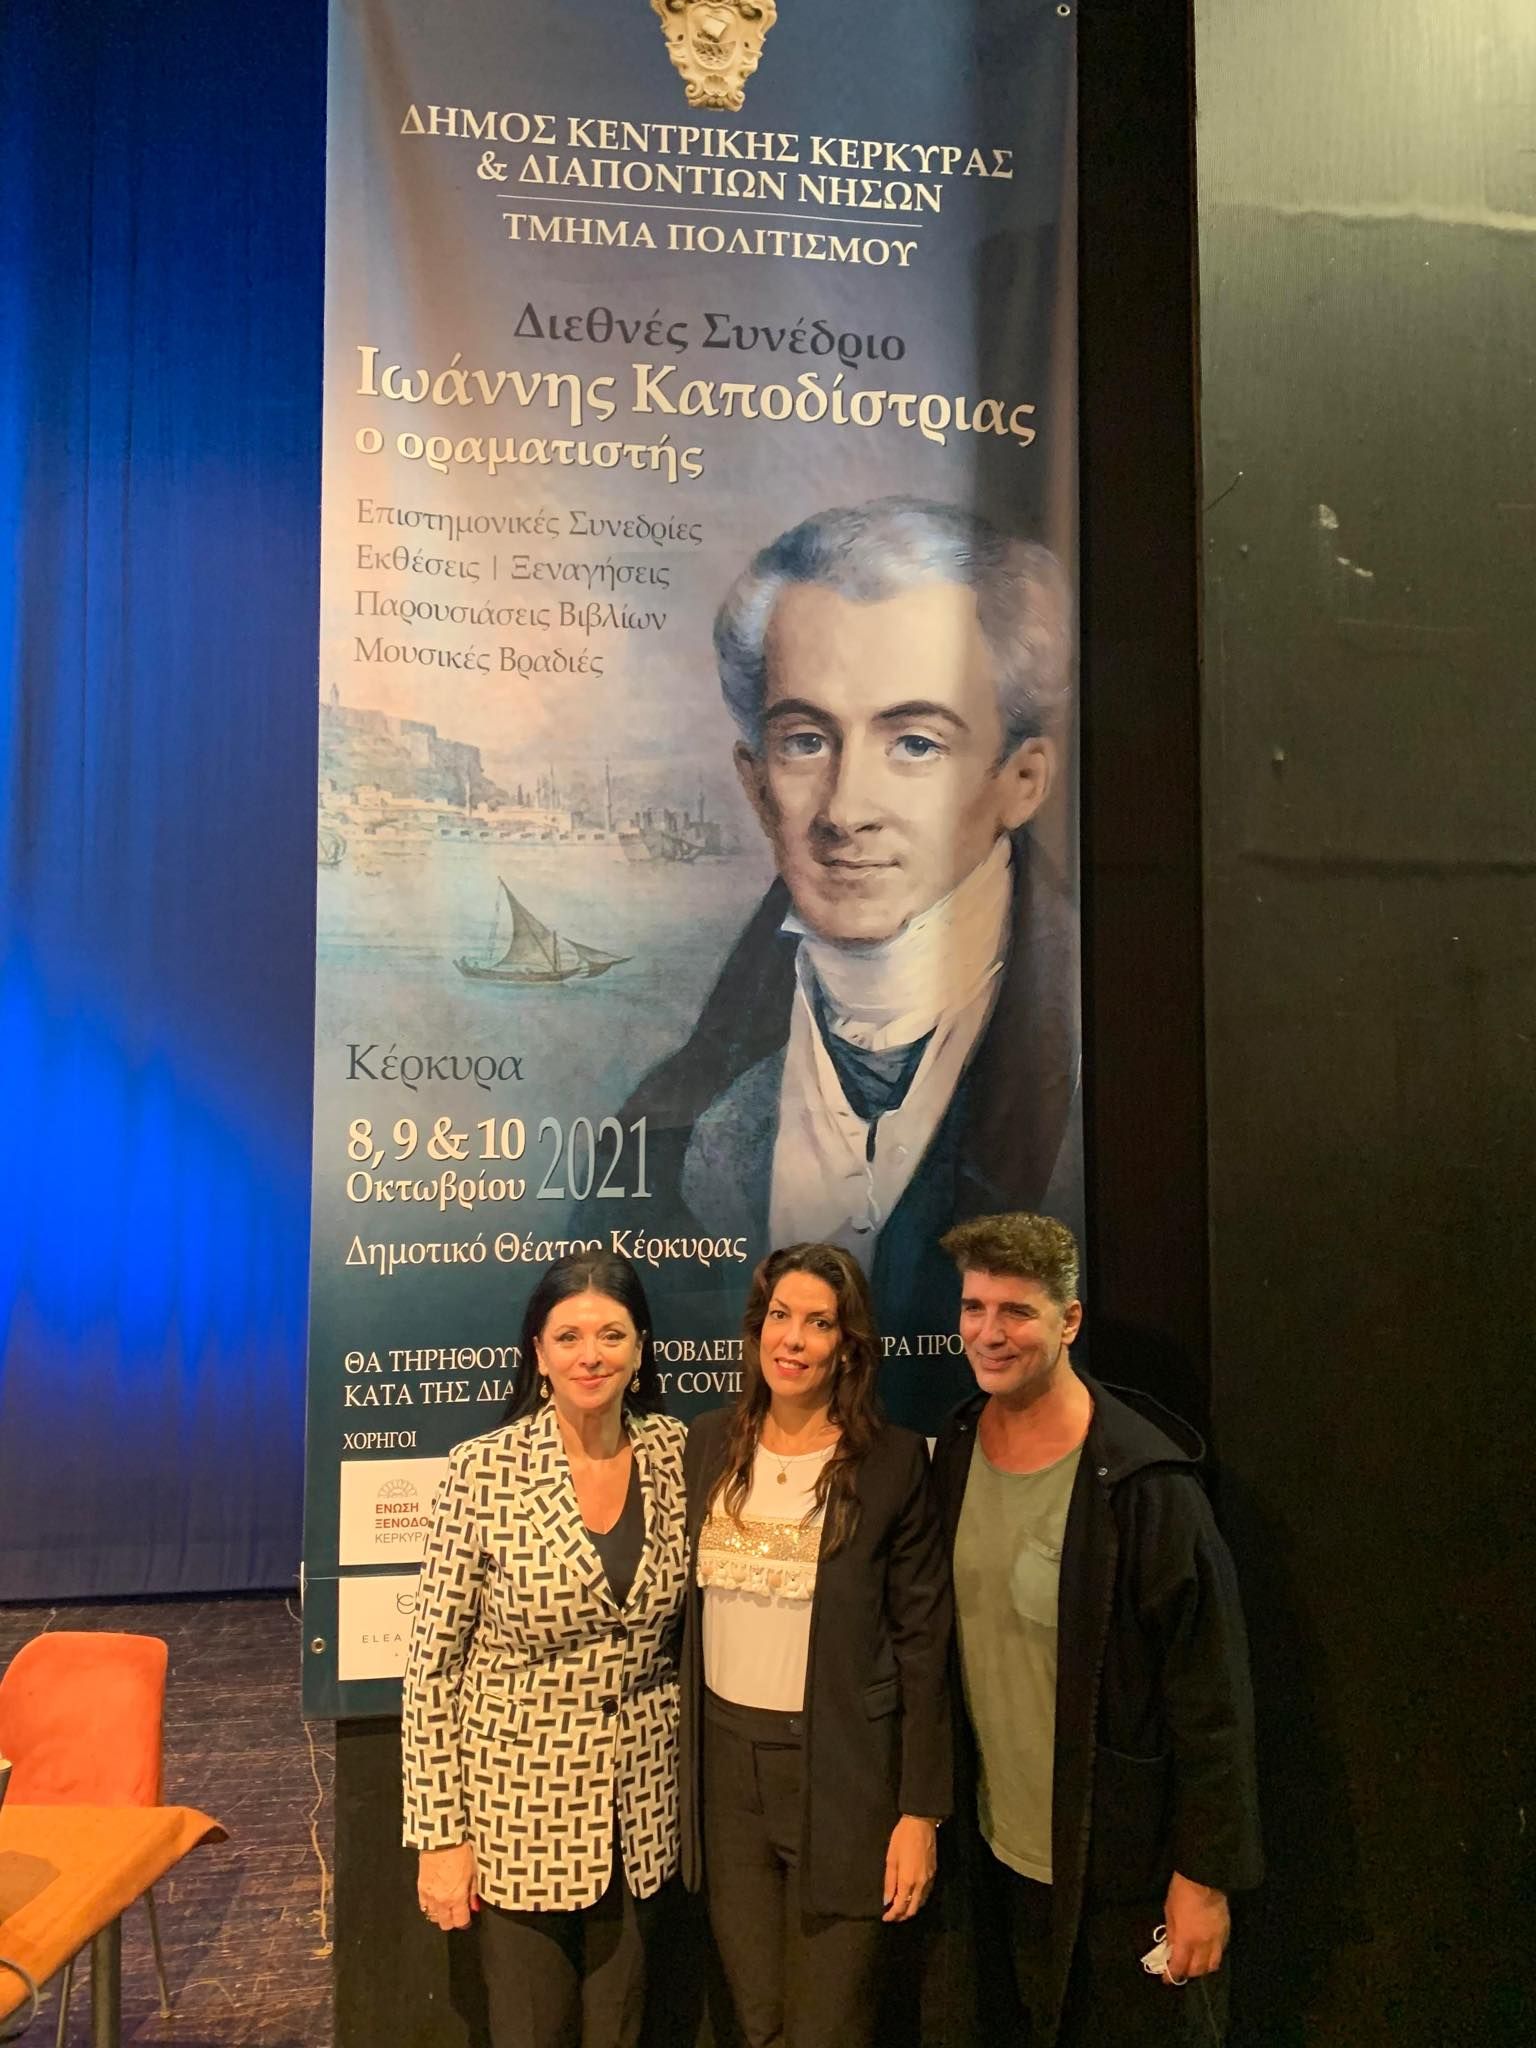 Tombrou thanks those who contributed to the organisation of the Ioannis Capodistrias conference 